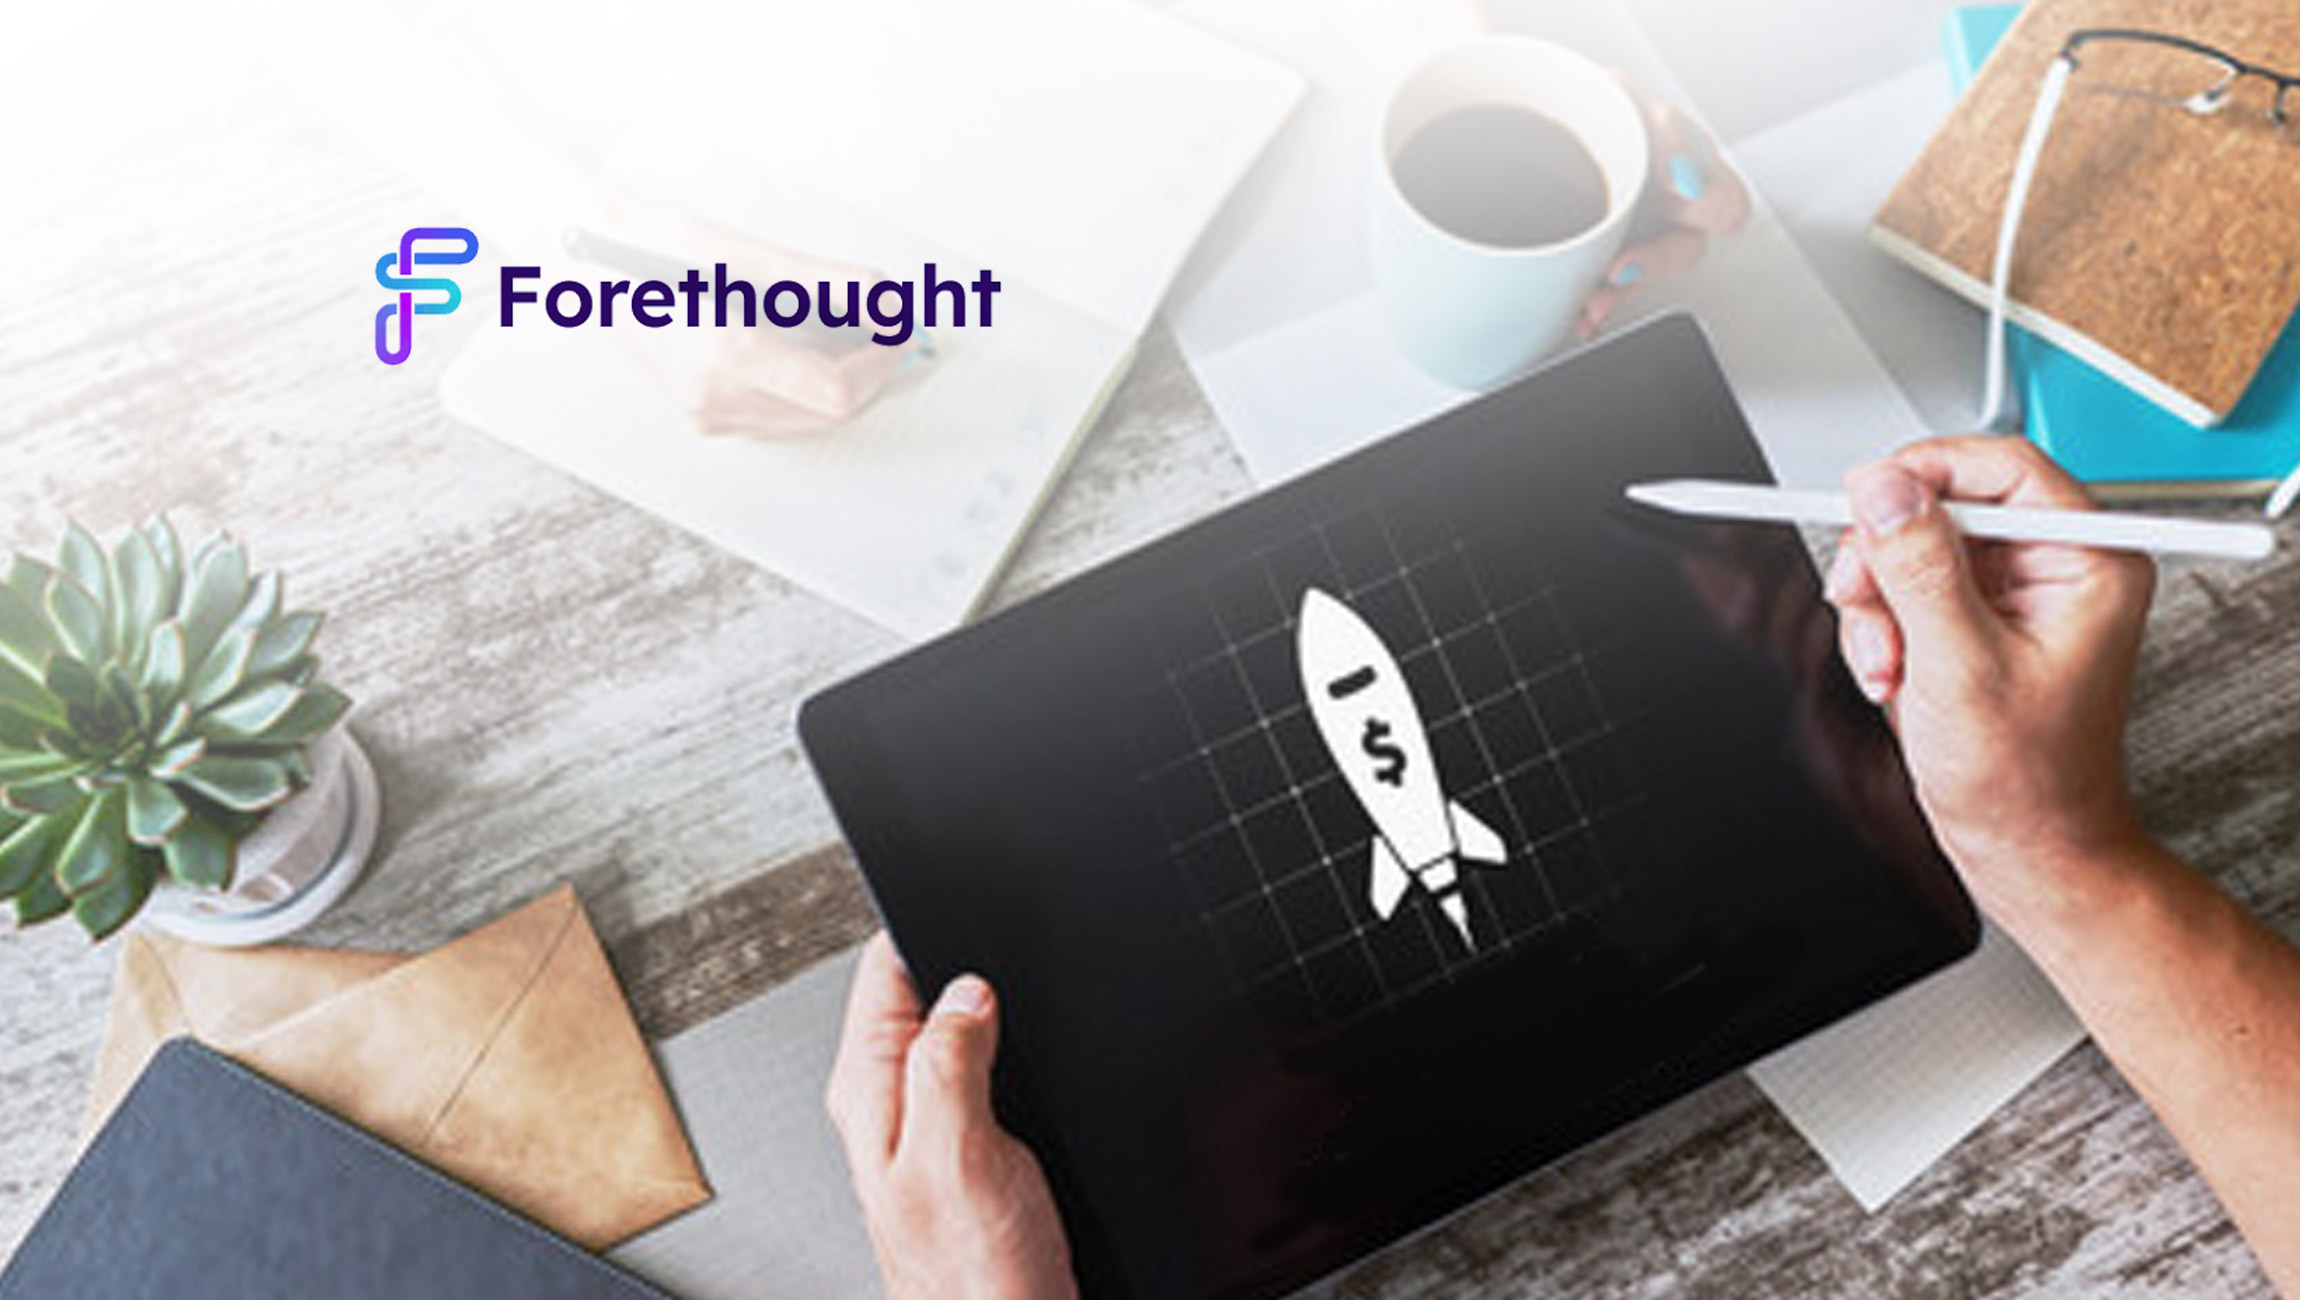 Forethought Named as One of CNBC's Top Startups for the Enterprise